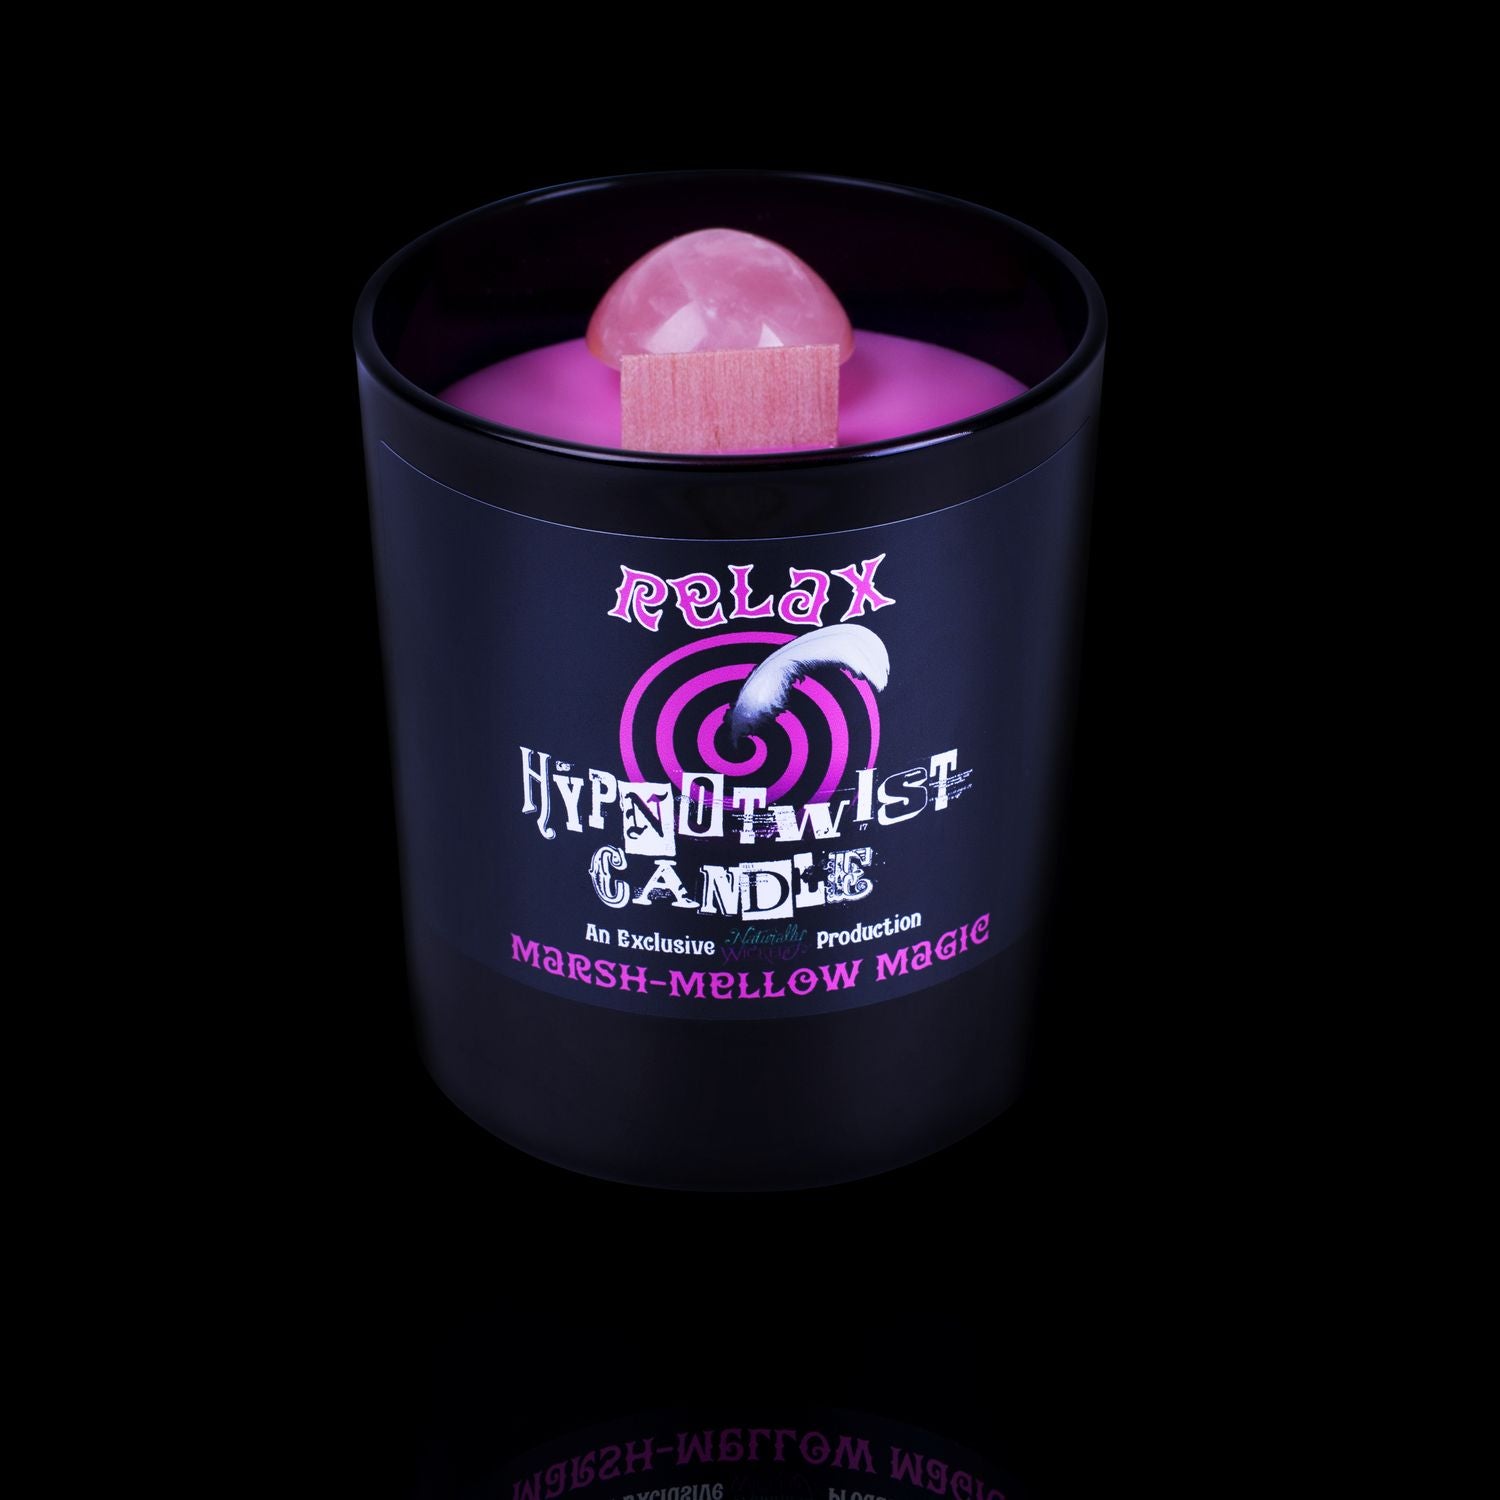 Naturally Wicked Hypnotwist Relax Candle Featuring Plant-based Soy Pink Wax Scented with Marsh-Mellow Magic & Includes A Rose Quartz Crystal Spinning Top.